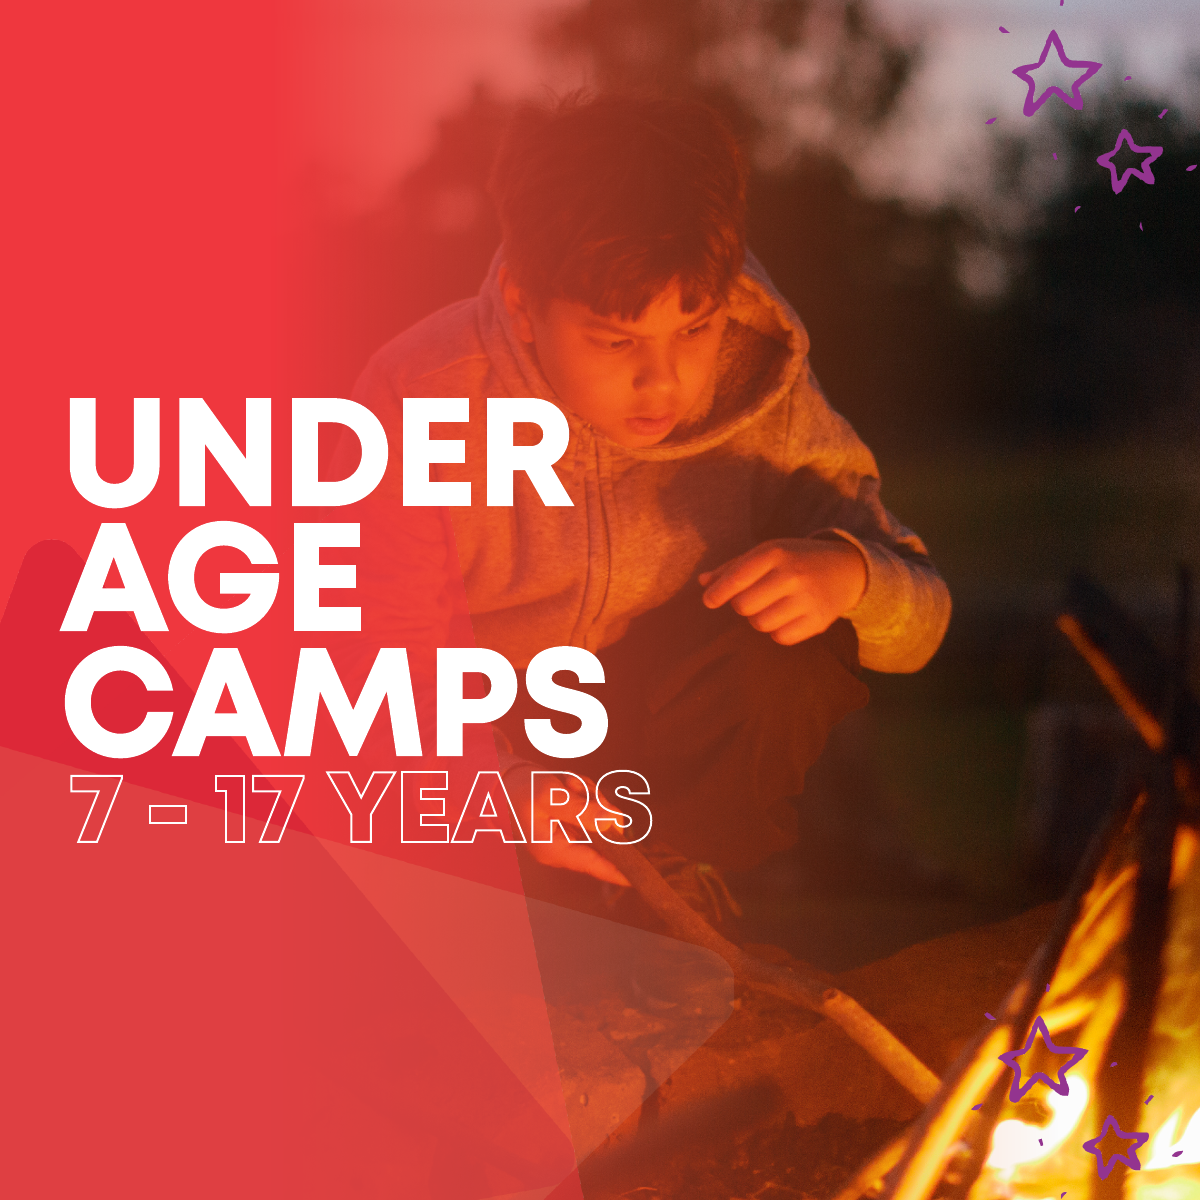 Under age camps 7 - 17 years